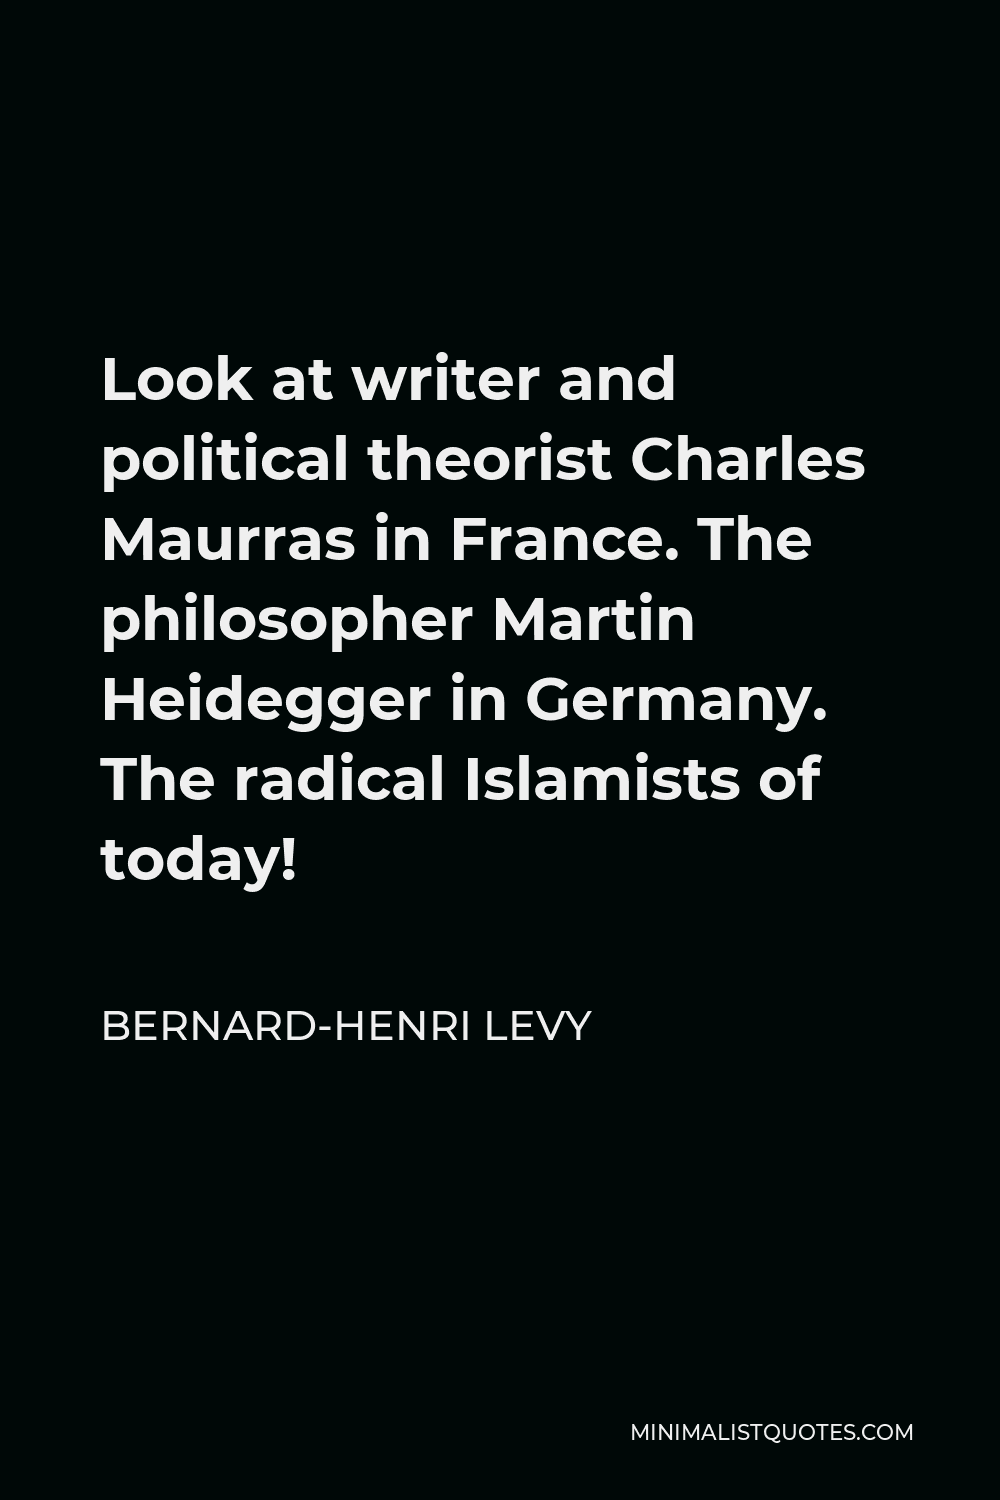 Bernard-Henri Levy Quote - Look at writer and political theorist Charles Maurras in France. The philosopher Martin Heidegger in Germany. The radical Islamists of today!